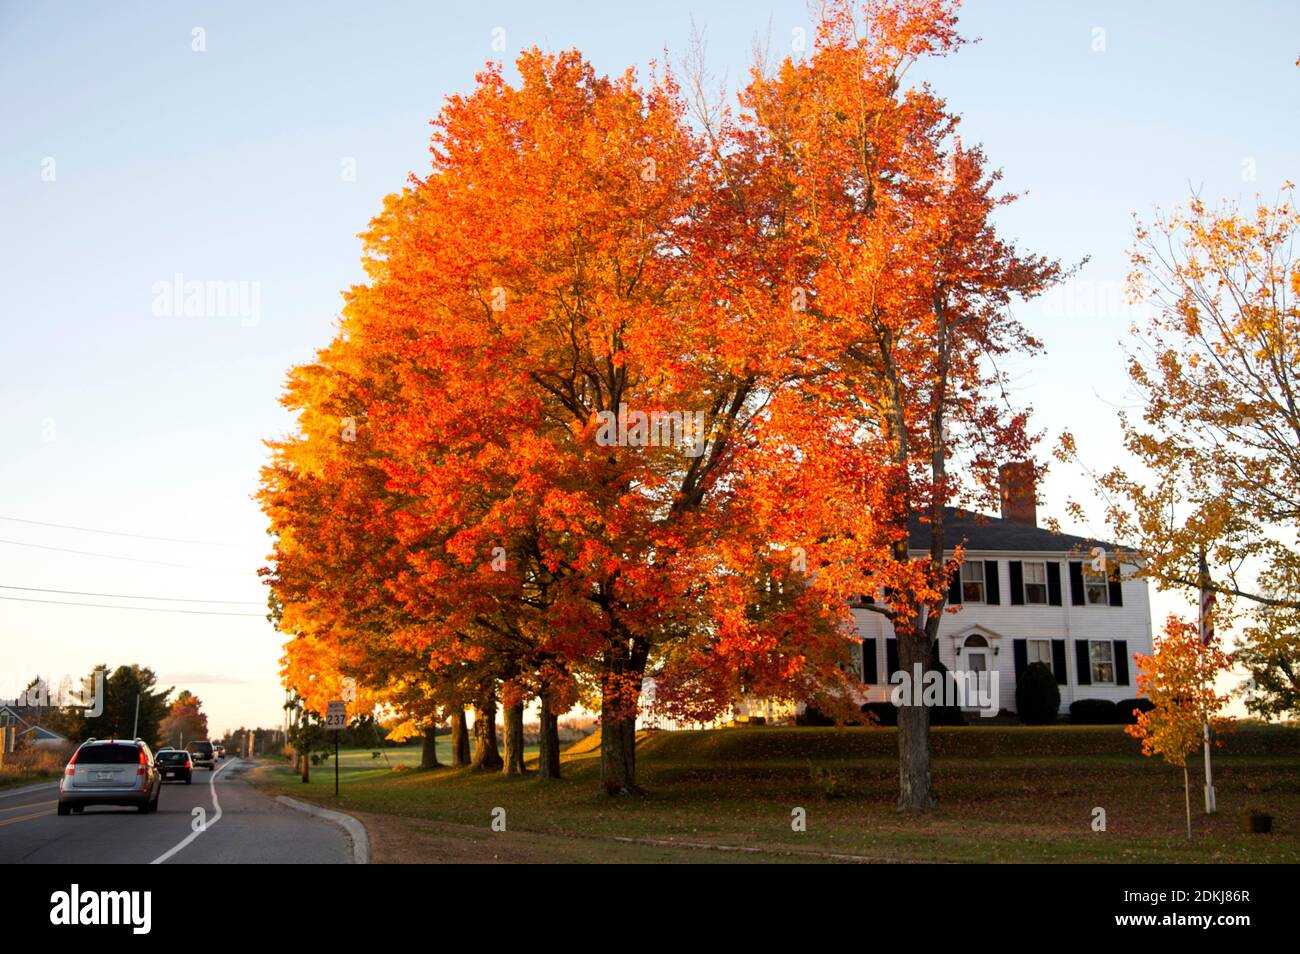 Fall colors on a huge Maple tree at sunset, rural Maine highway, Portland, Maine, United States Stock Photo